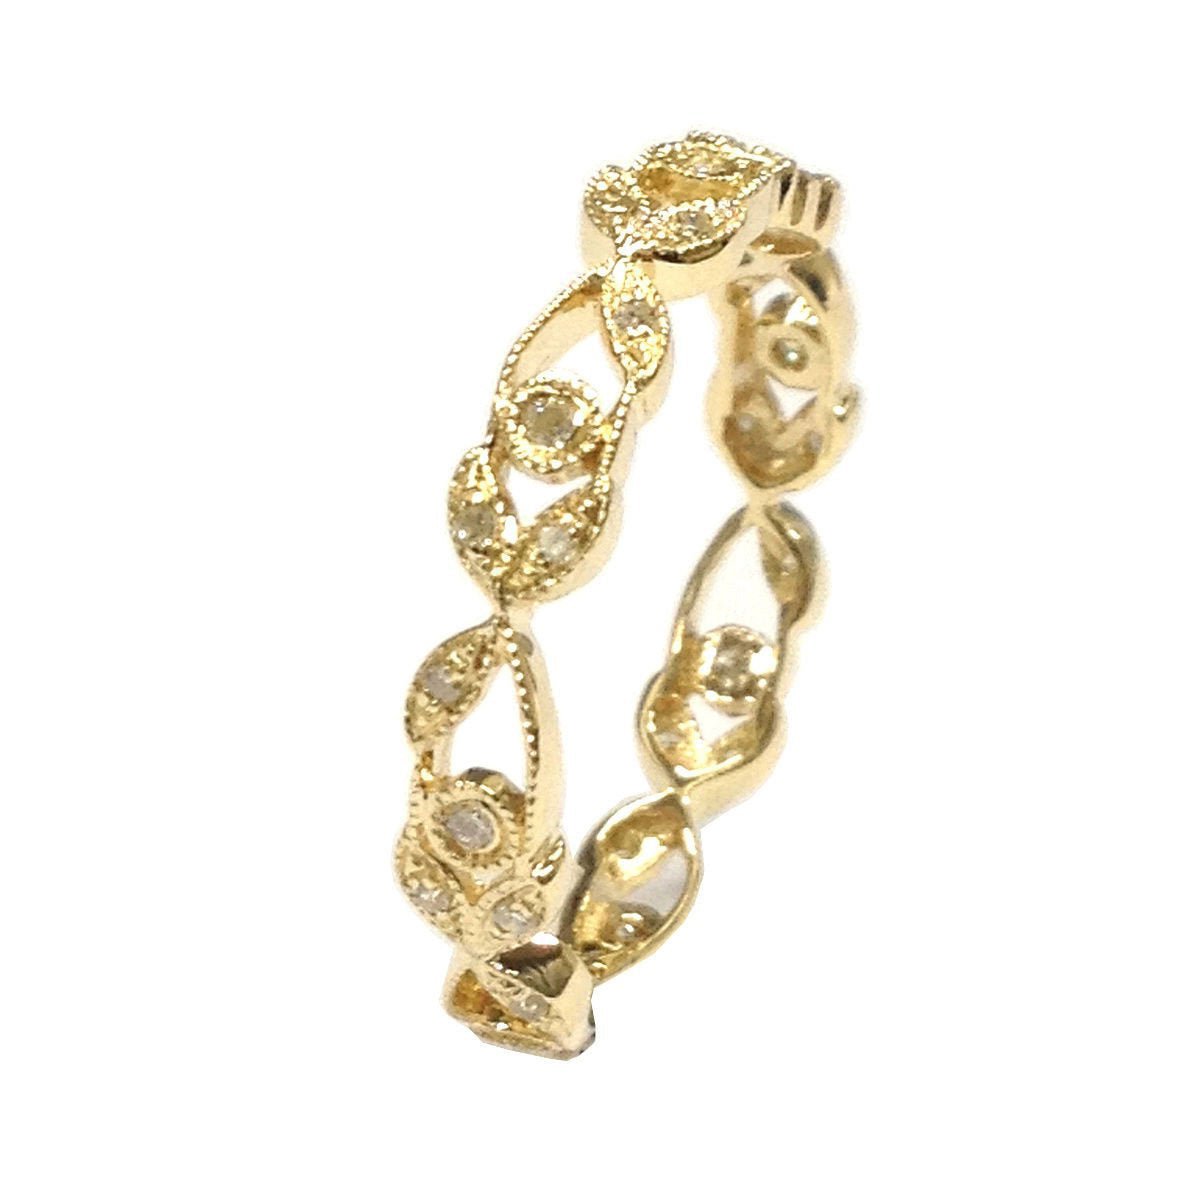 Floral Leaf Eternity Diamond Wedding Band Anniversary Ring 14K Yellow Gold - Lord of Gem Rings